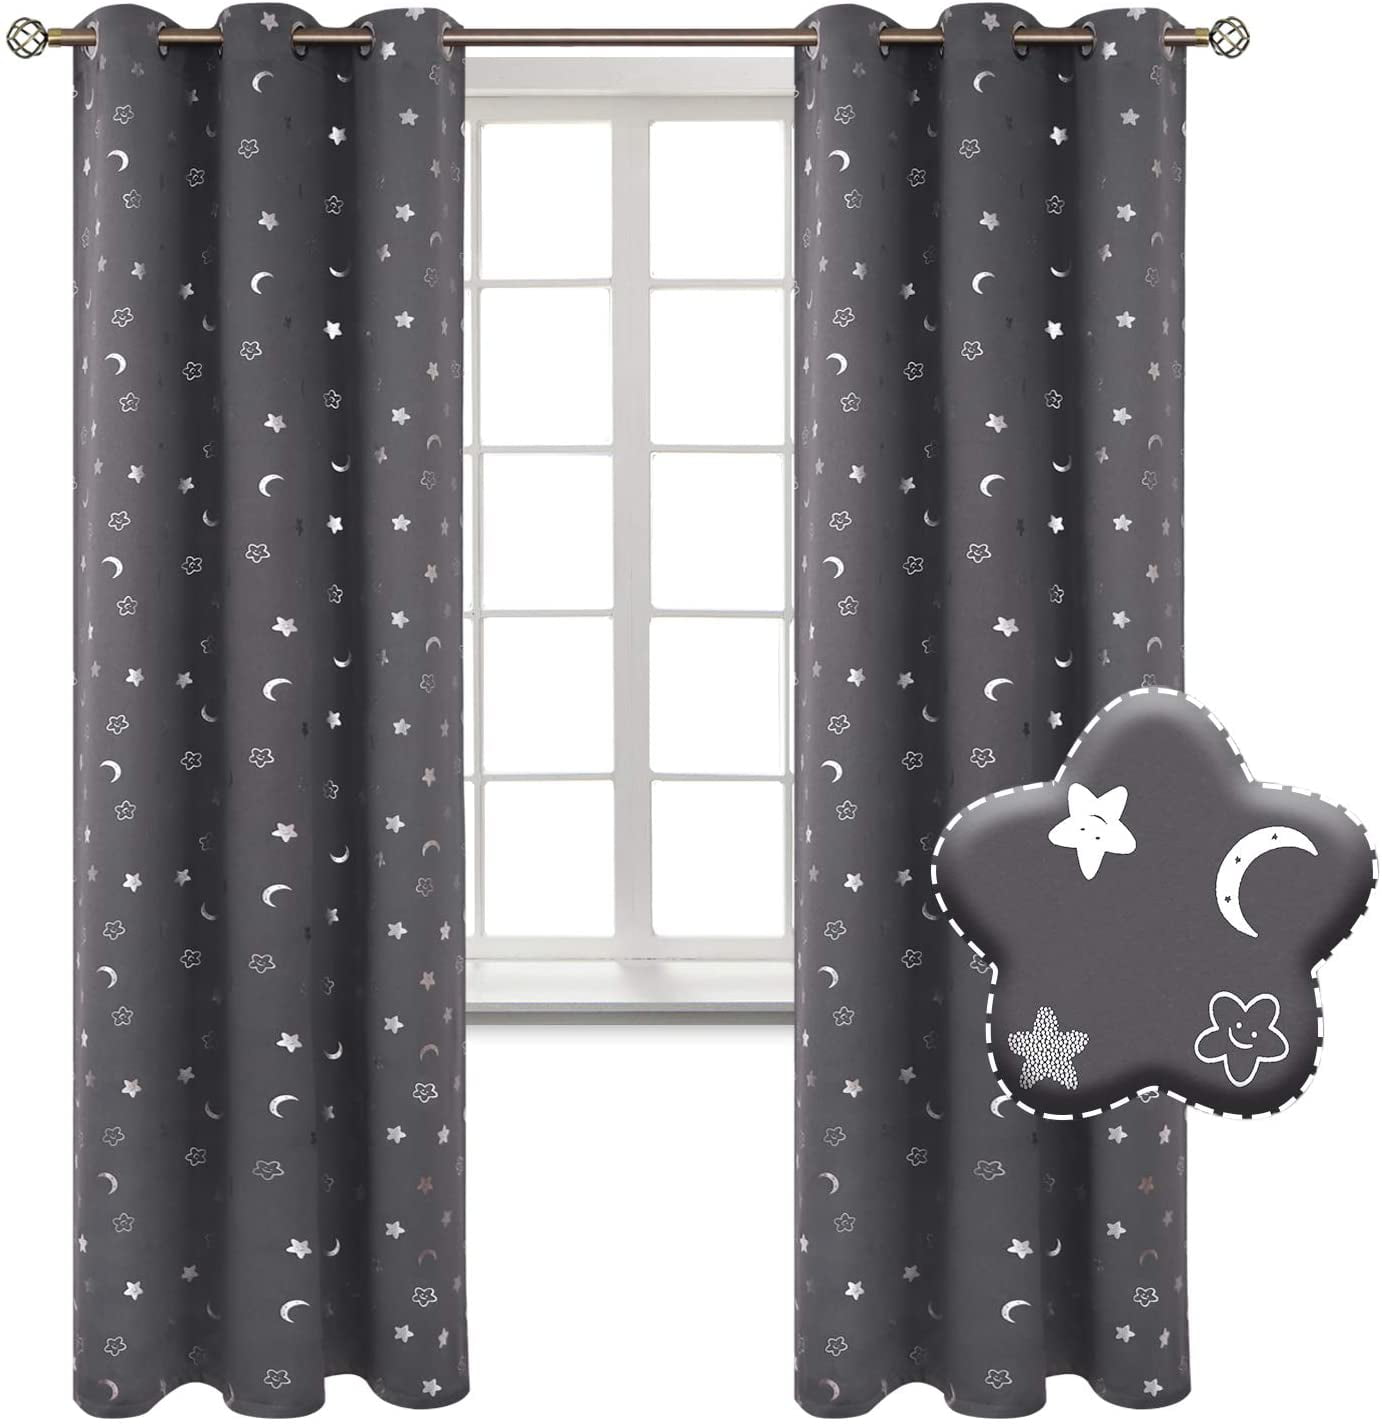 Grommet Thermal Insulated Room Darkening Printed Curtains for Nursery BGment Moon and Stars Blackout Curtains for Kids Bedroom Emerald Green 2 Panels of 52 x 84 Inch 